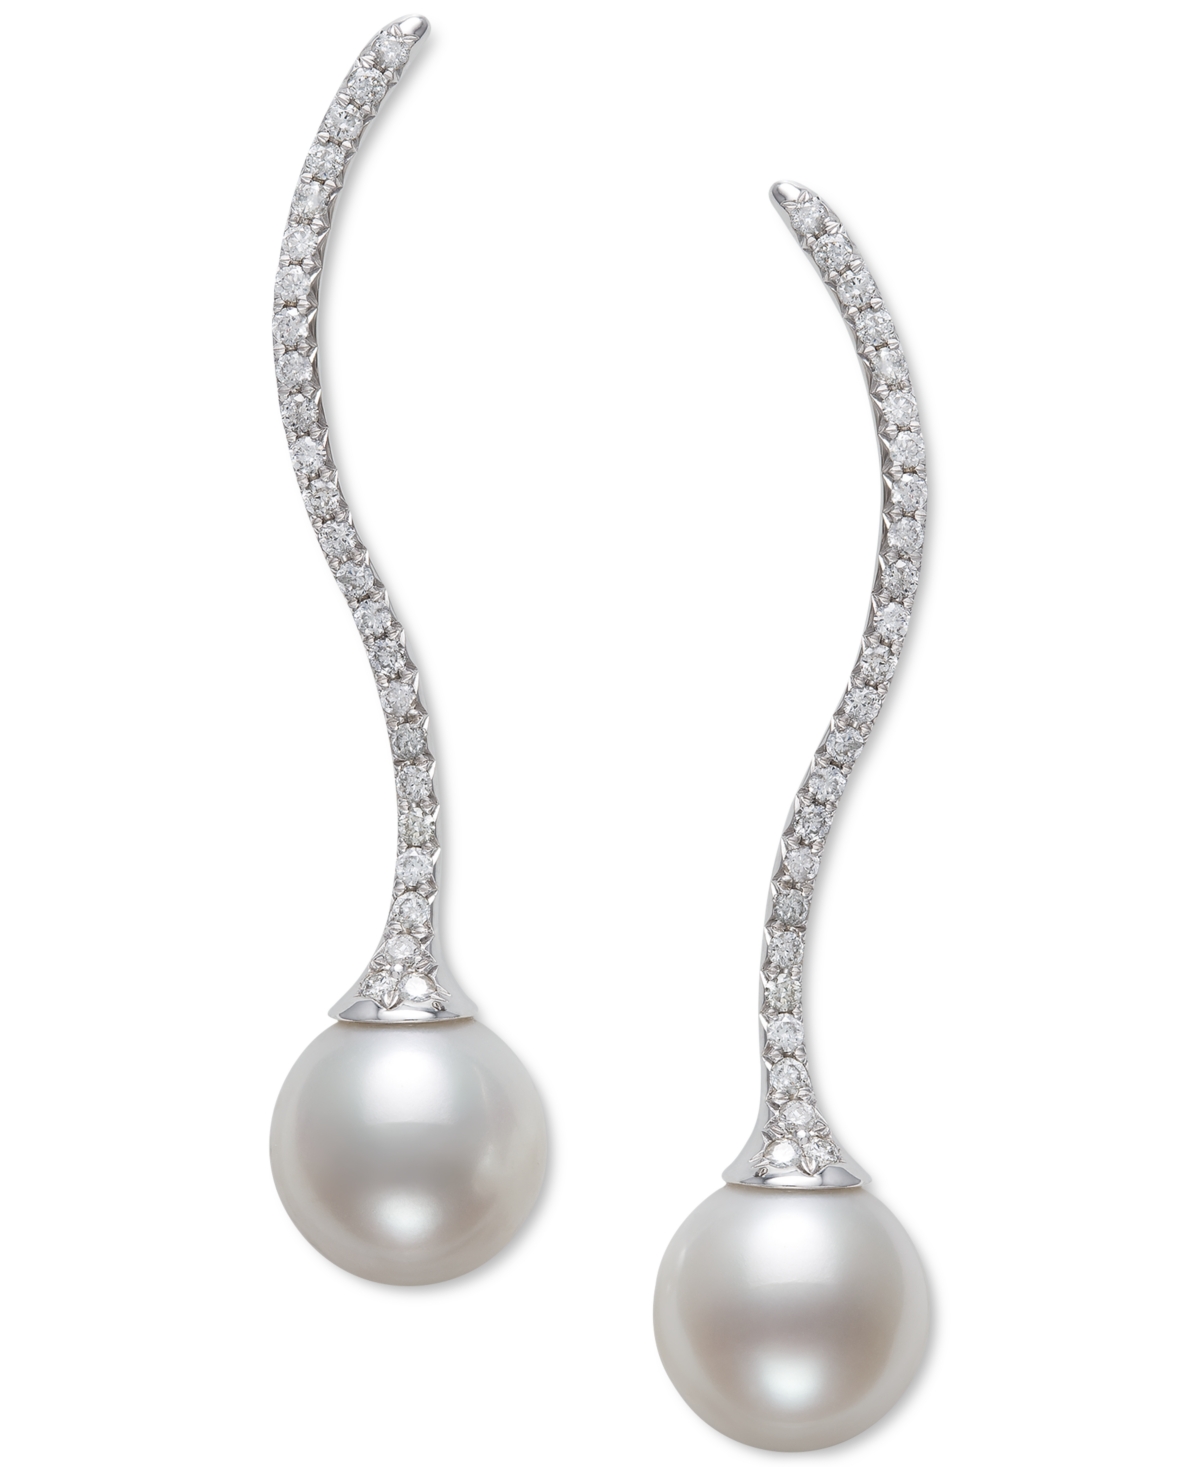 Cultured Freshwater Pearl (9mm) & Diamond (3/8 ct. t.w.) Swirl Drop Earrings in 14k White Gold, Created for Macy's - White Gold